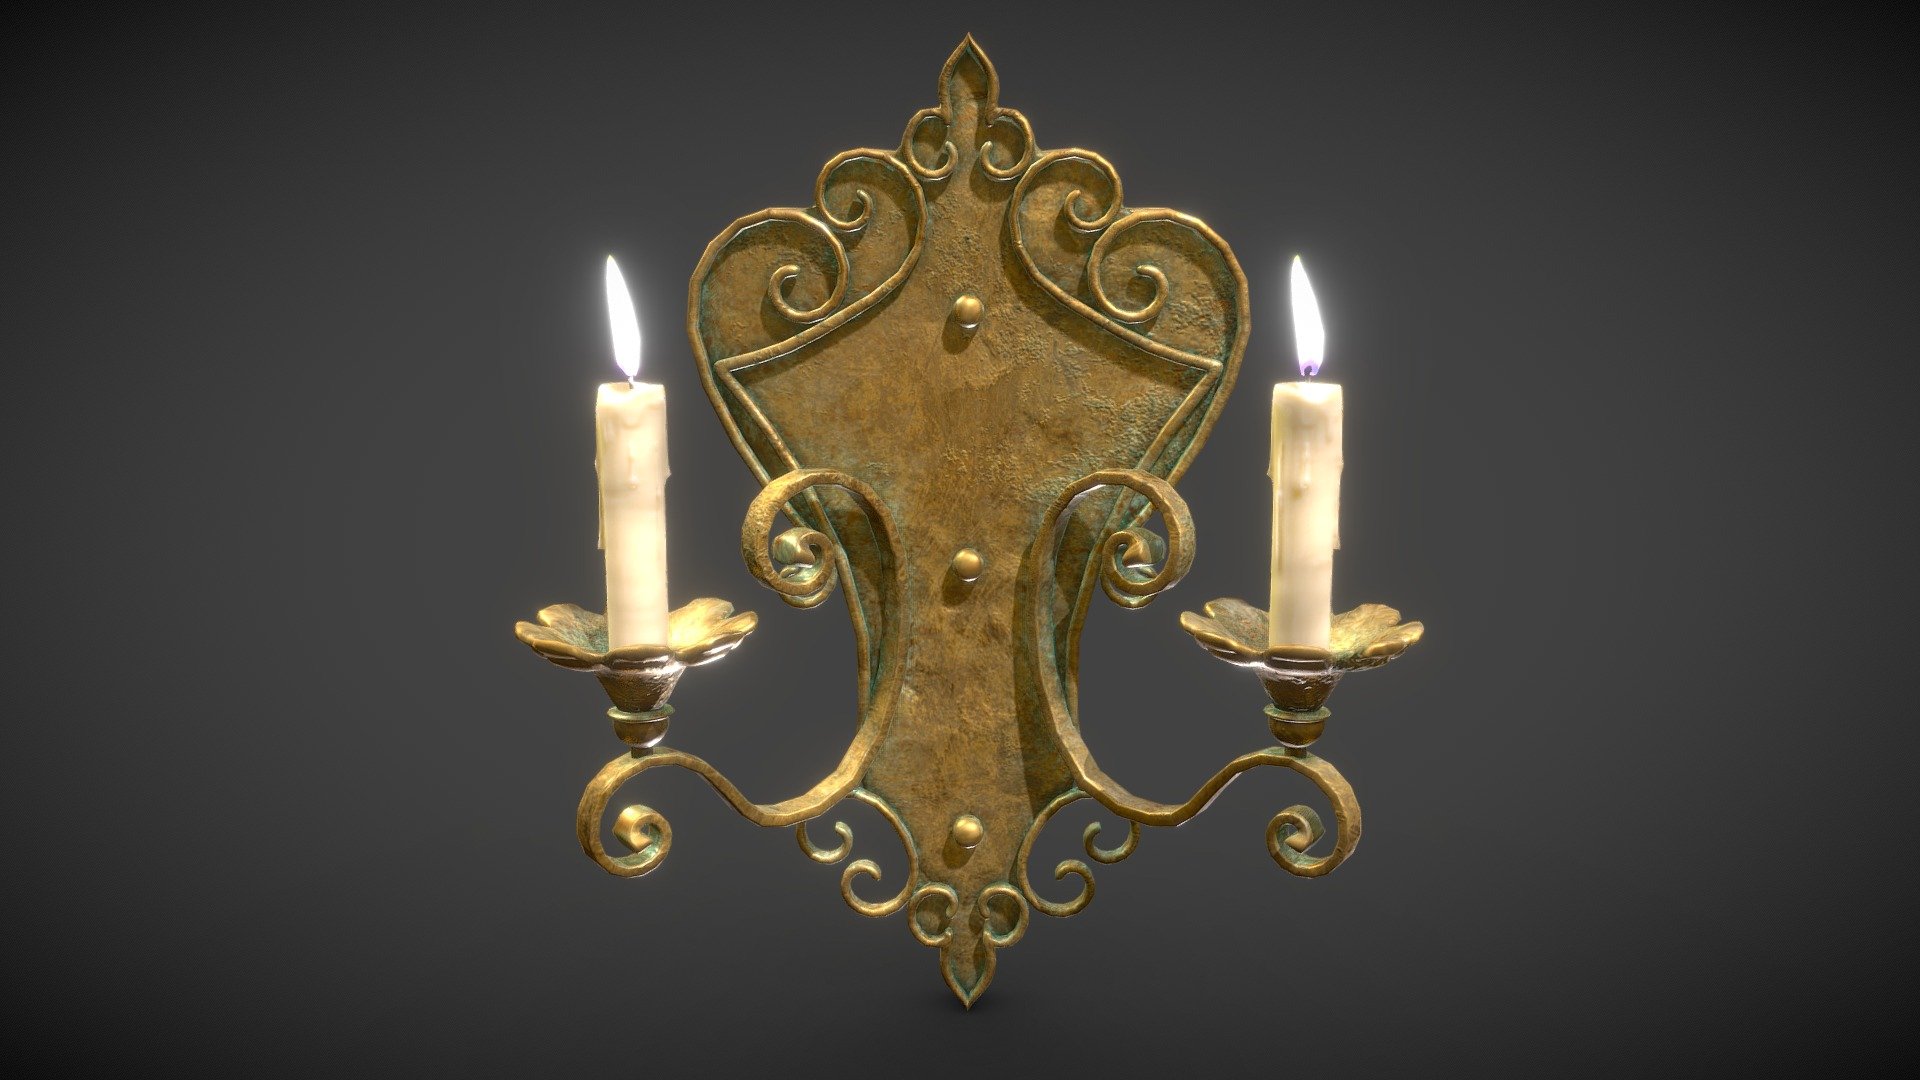 Check out my website for more products and better deals! &amp;gt;&amp;gt; SM5 by Heledahn &amp;lt;&amp;lt;


This is a digital 3d model of an Victorian wall lamp. The lamp can be used either with a flame or a light bulb (included in the geometry and hidden by a mask modifier of the WEBSITE PRODUCT ONLY).

This model can be used for any Medieval/Fantasy themed render project, used either as a background prop, or as a closeup prop due to its high detail and visual quality.

This product will achieve realistic results in your rendering projects and animations, being greatly suited for close-ups due to their high quality topology and PBR shading 3d model